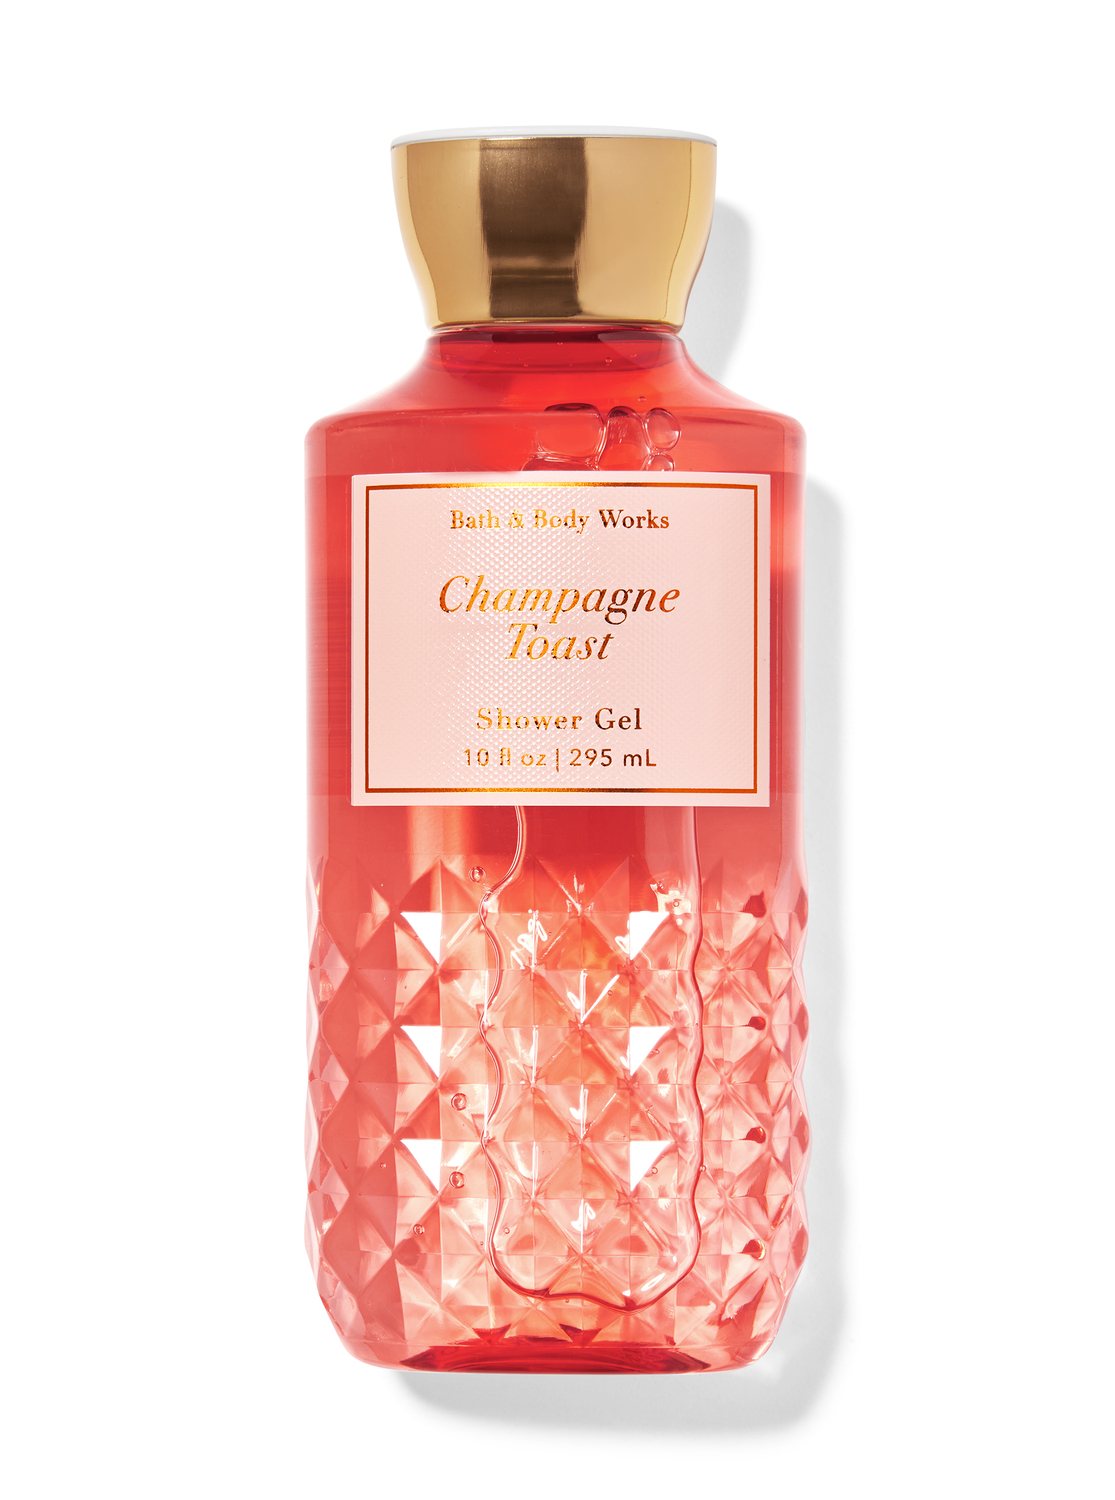 Champagne Toast Body Wash And Shower Gel Bath And Body Works Australia Official Site 